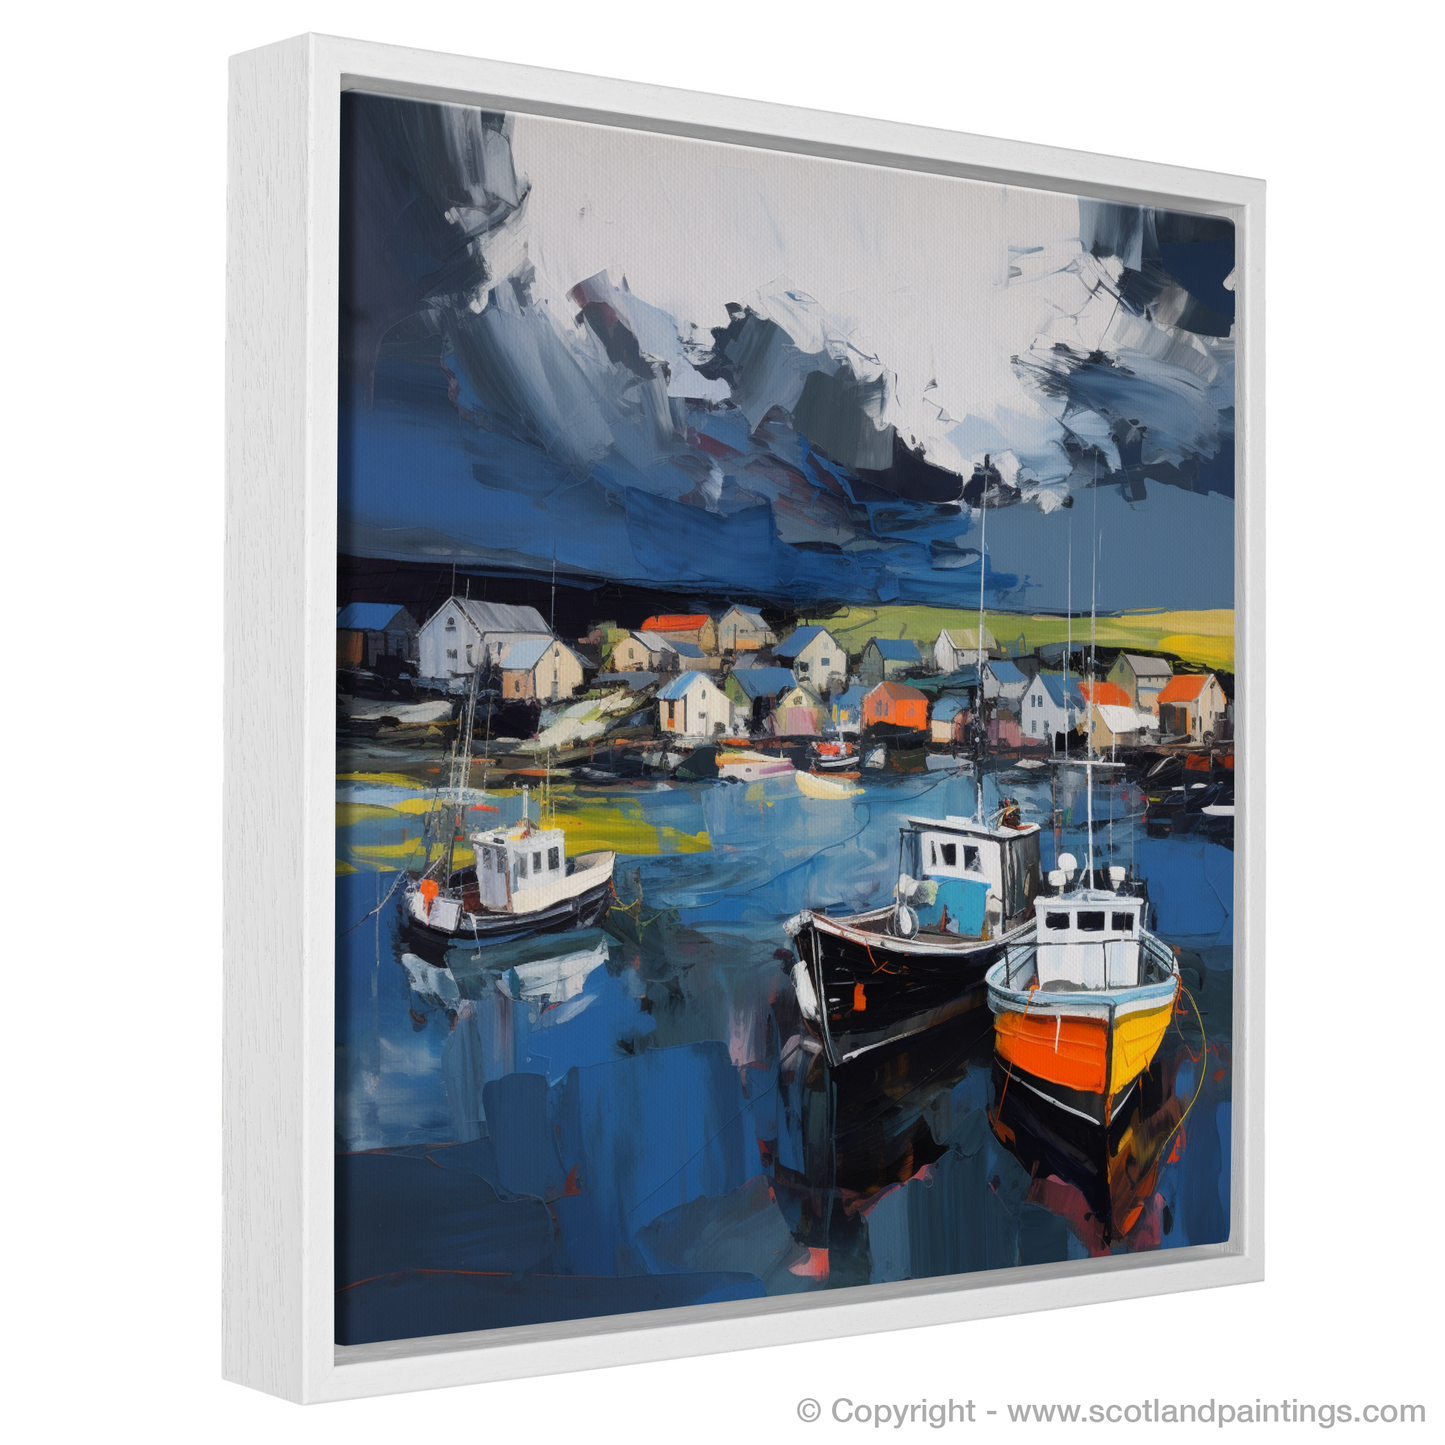 Painting and Art Print of St Abba's Harbour with a stormy sky entitled "Storm Over St Abba's Harbour: An Expressionist Ode to Scottish Resilience".